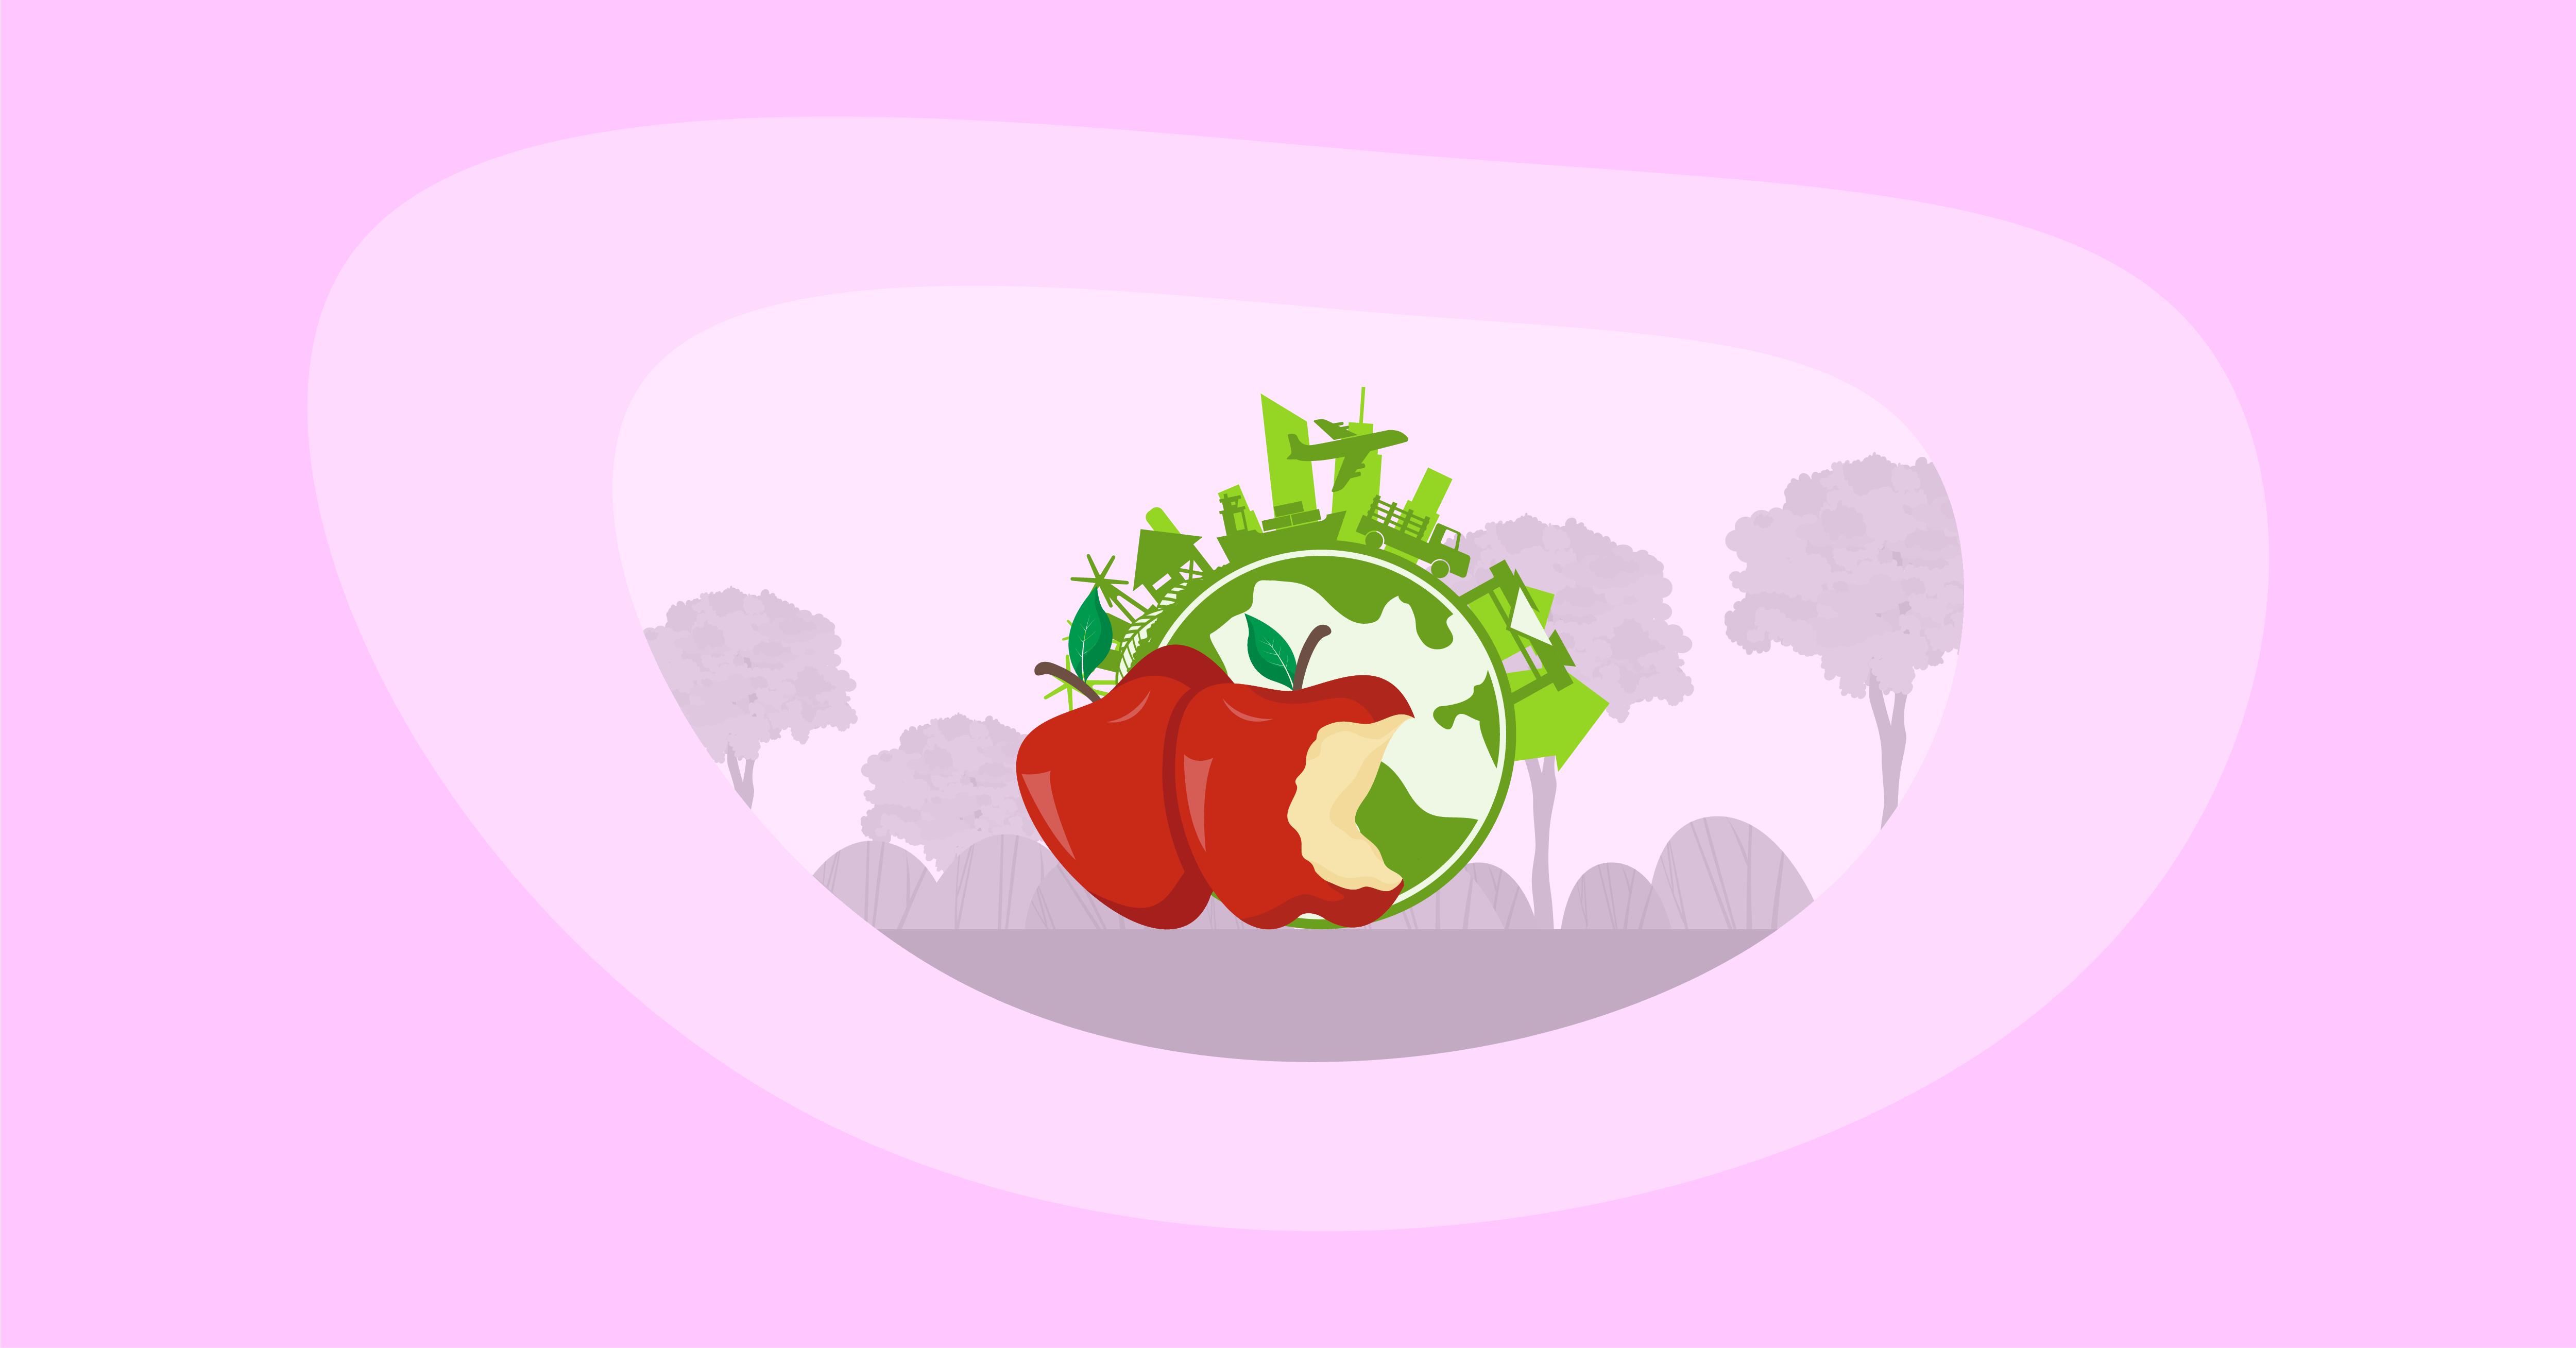 Illustration of apples and their environmental impact